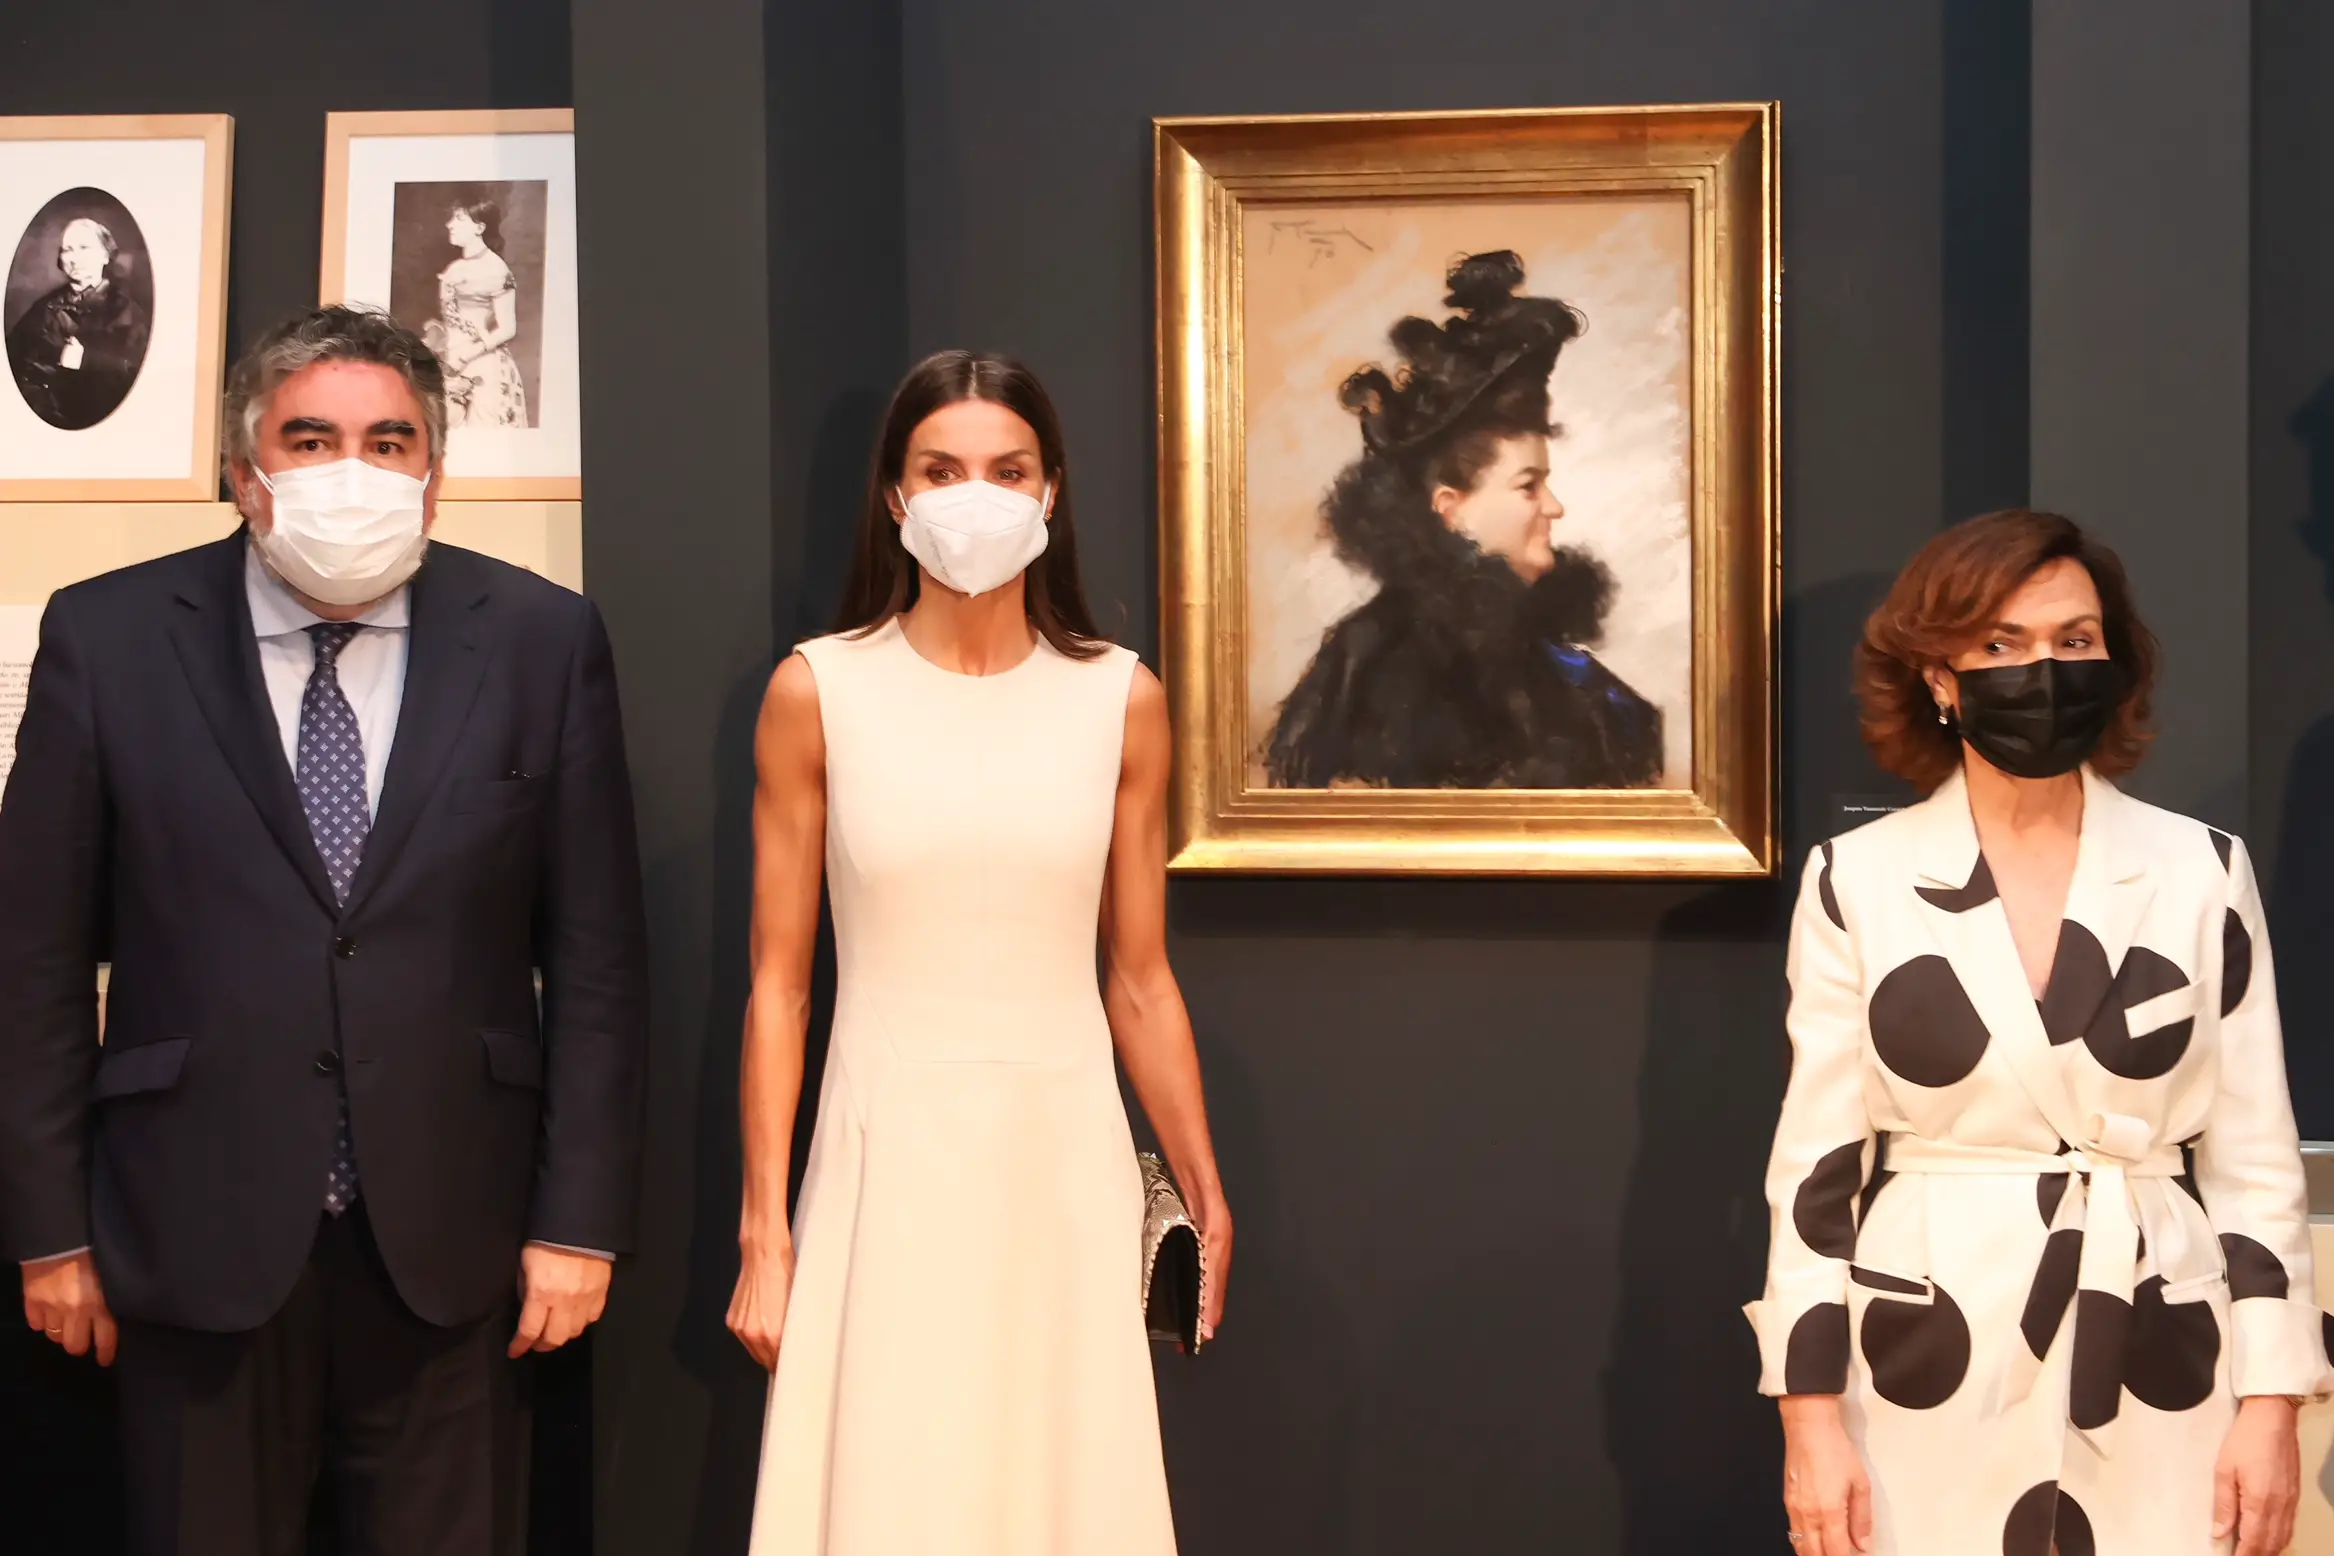 Queen Letizia of Spain presided over the inauguration of "Emilia Pardo Bazán. The challenge of modernity" at the National Library of Spain in Madrid